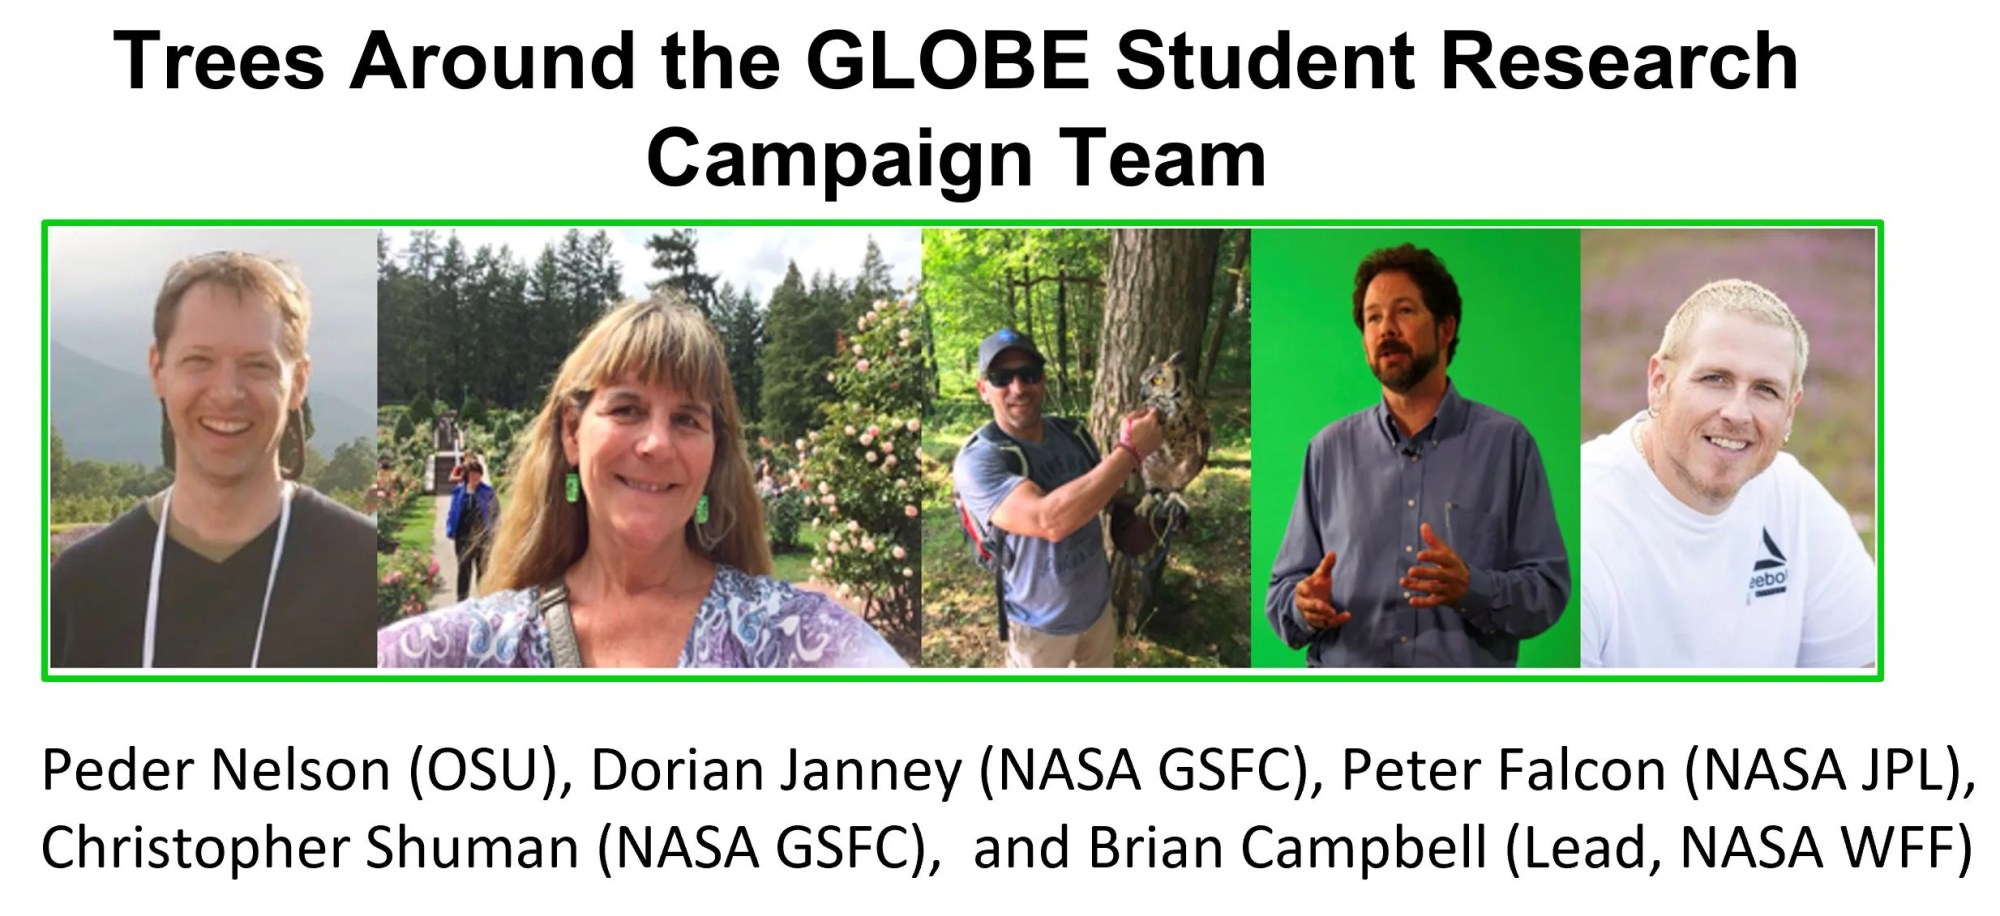 Photos of the Trees Around the GLOBE Student Research Campaign Team. From left to right: Peder Nelson (OSU), Dorian Janney (NASA GSFC), Peter Falcon (NASA JPL), Christopher Shuman (NASA GSFC), and Brian Campbell (Lead, NASA WFF).